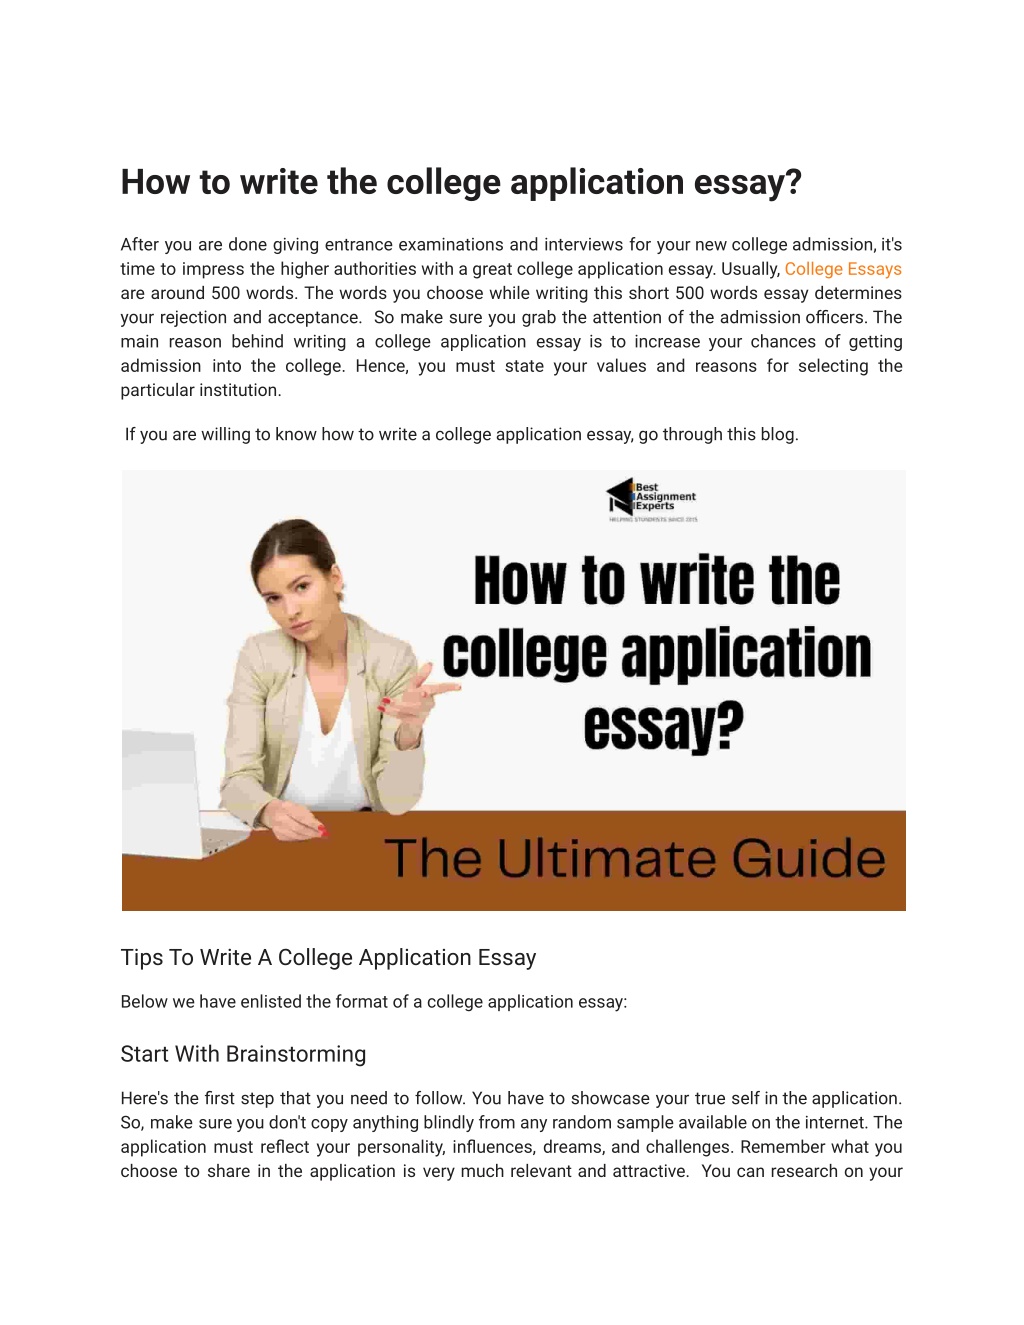 do all college applications require essay